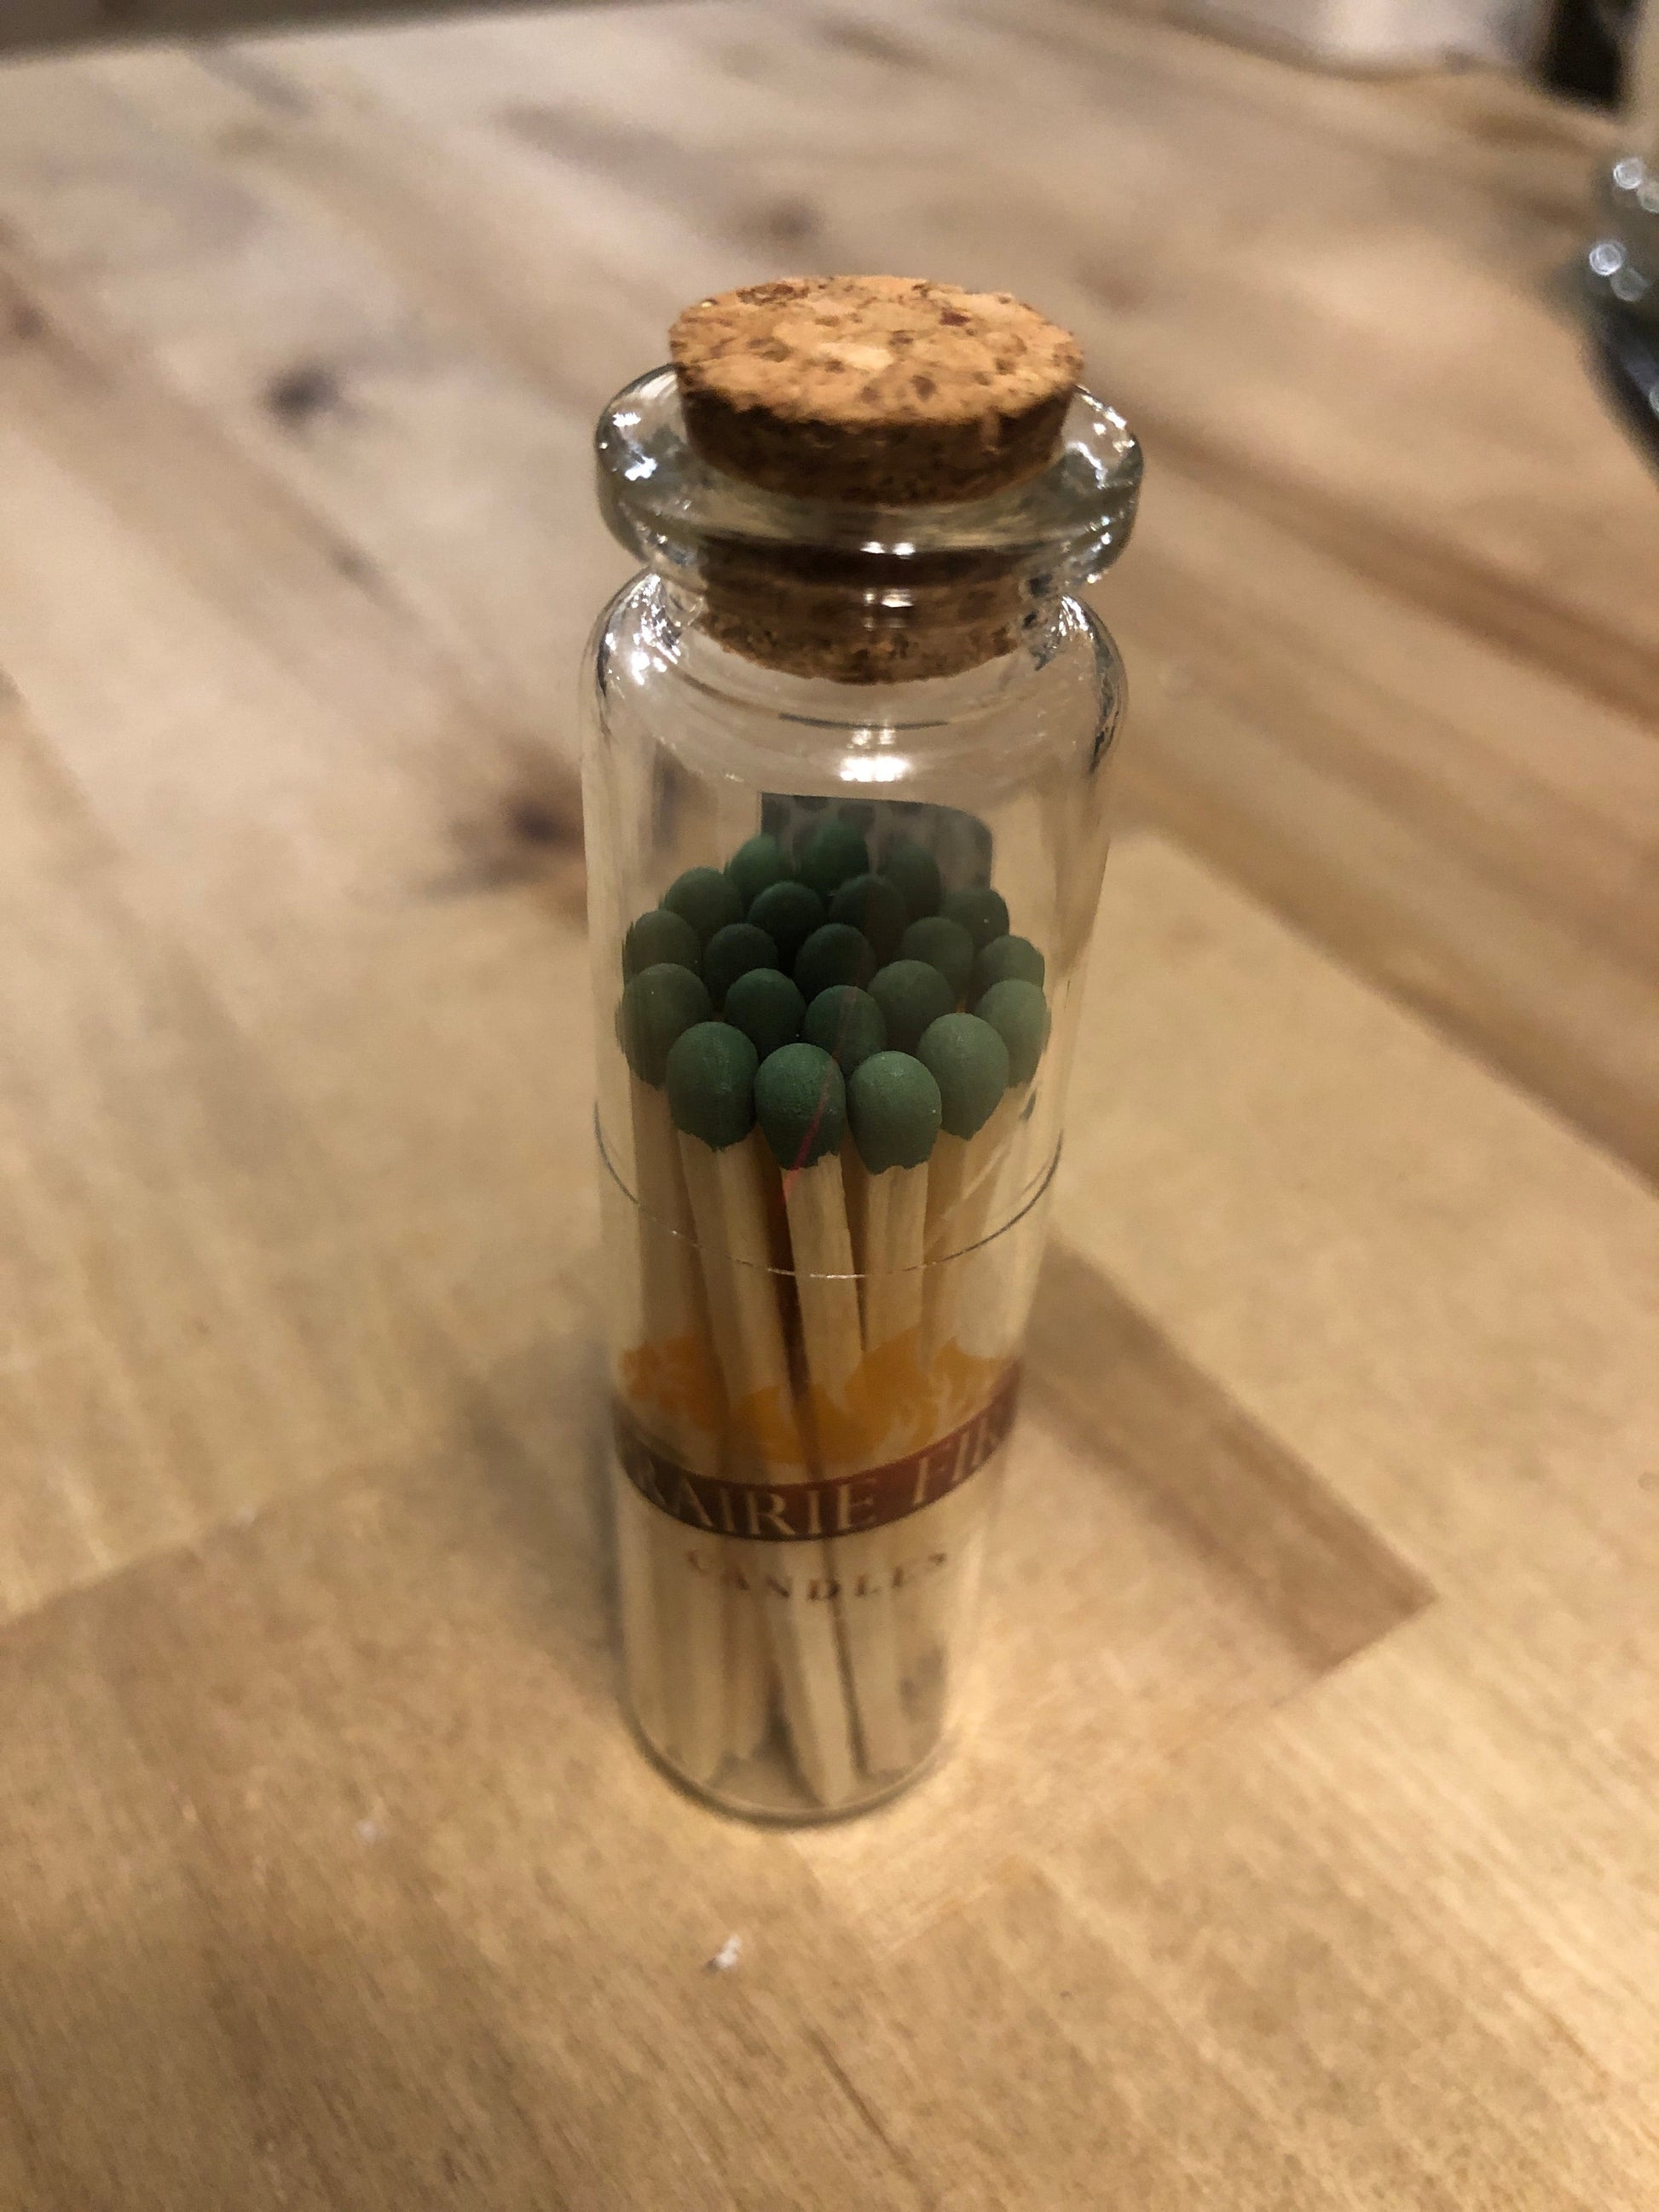 Apothecary Jar Wooden Matches | Matchstick Jar | Honeycomb Strike On Bottle | Glass Vial | 21 Matches | Responsibly Managed Forests-1